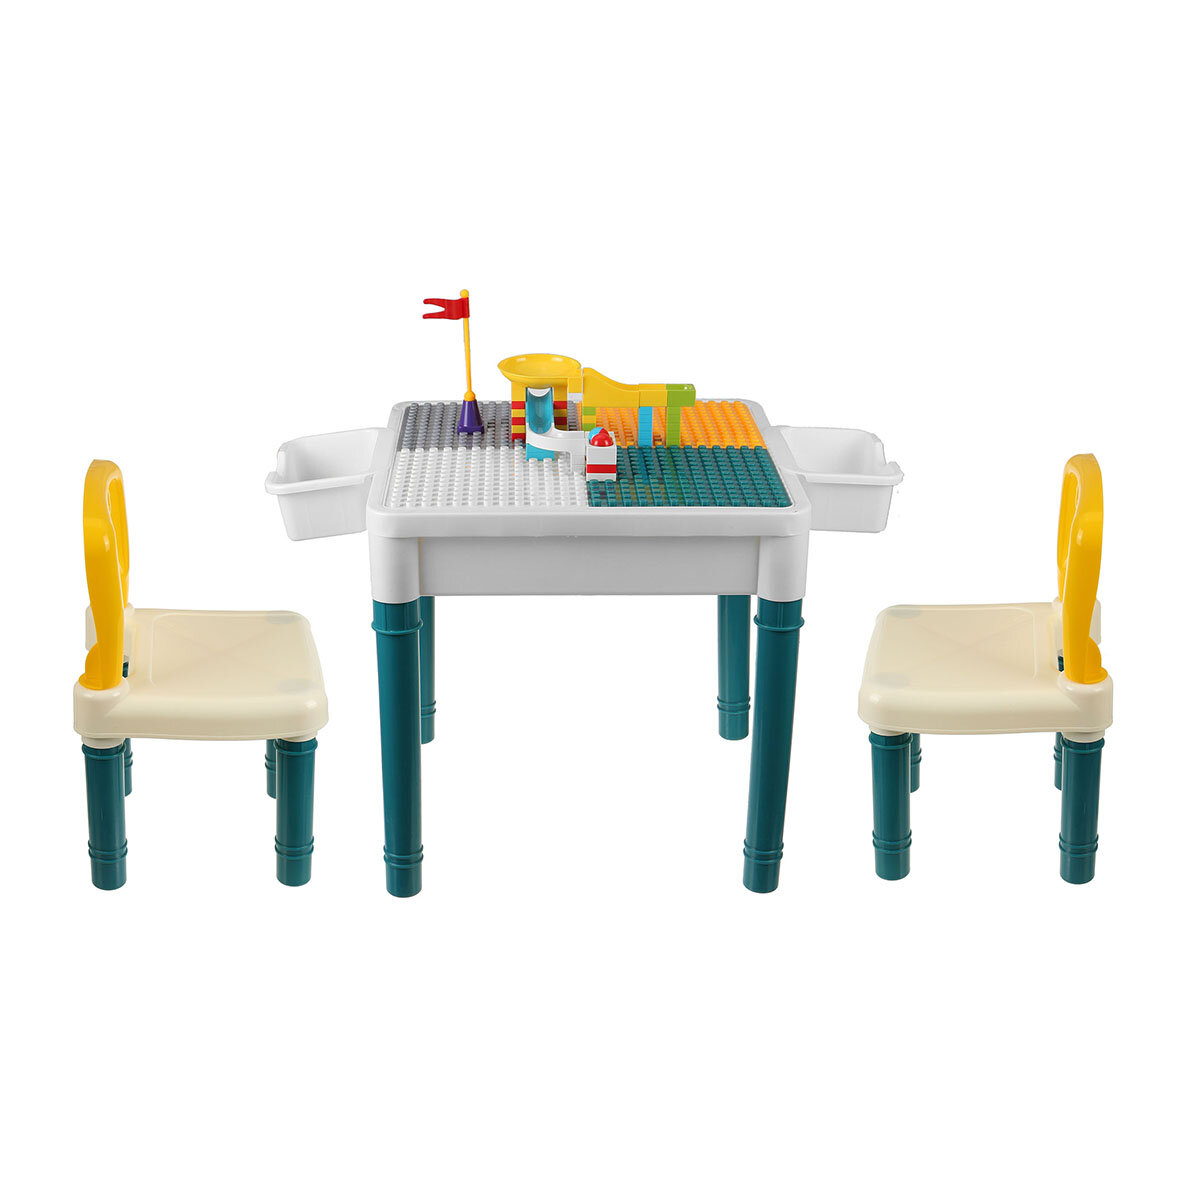 Image of Square Childrens Plastic Table and Chair Game Blocks Desk